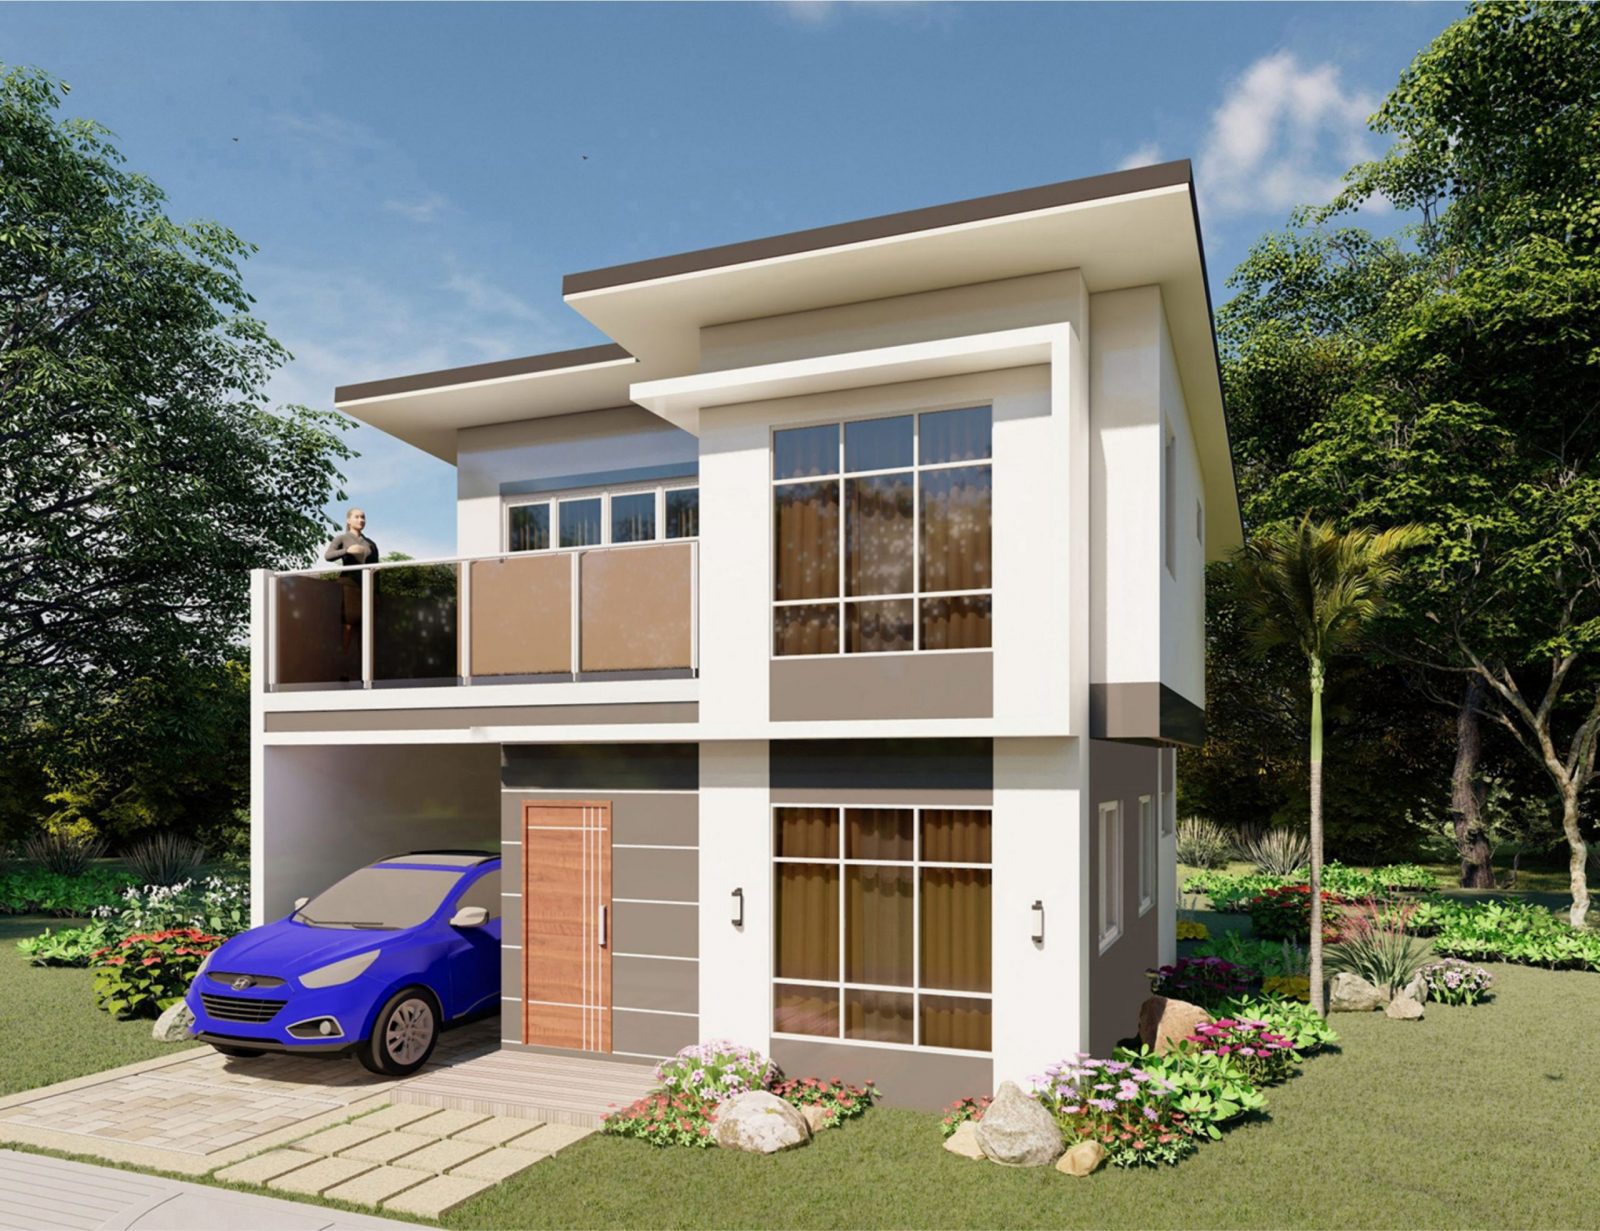 Tour our Chloe house model: A beautiful, 2-storey 120-sqm family home